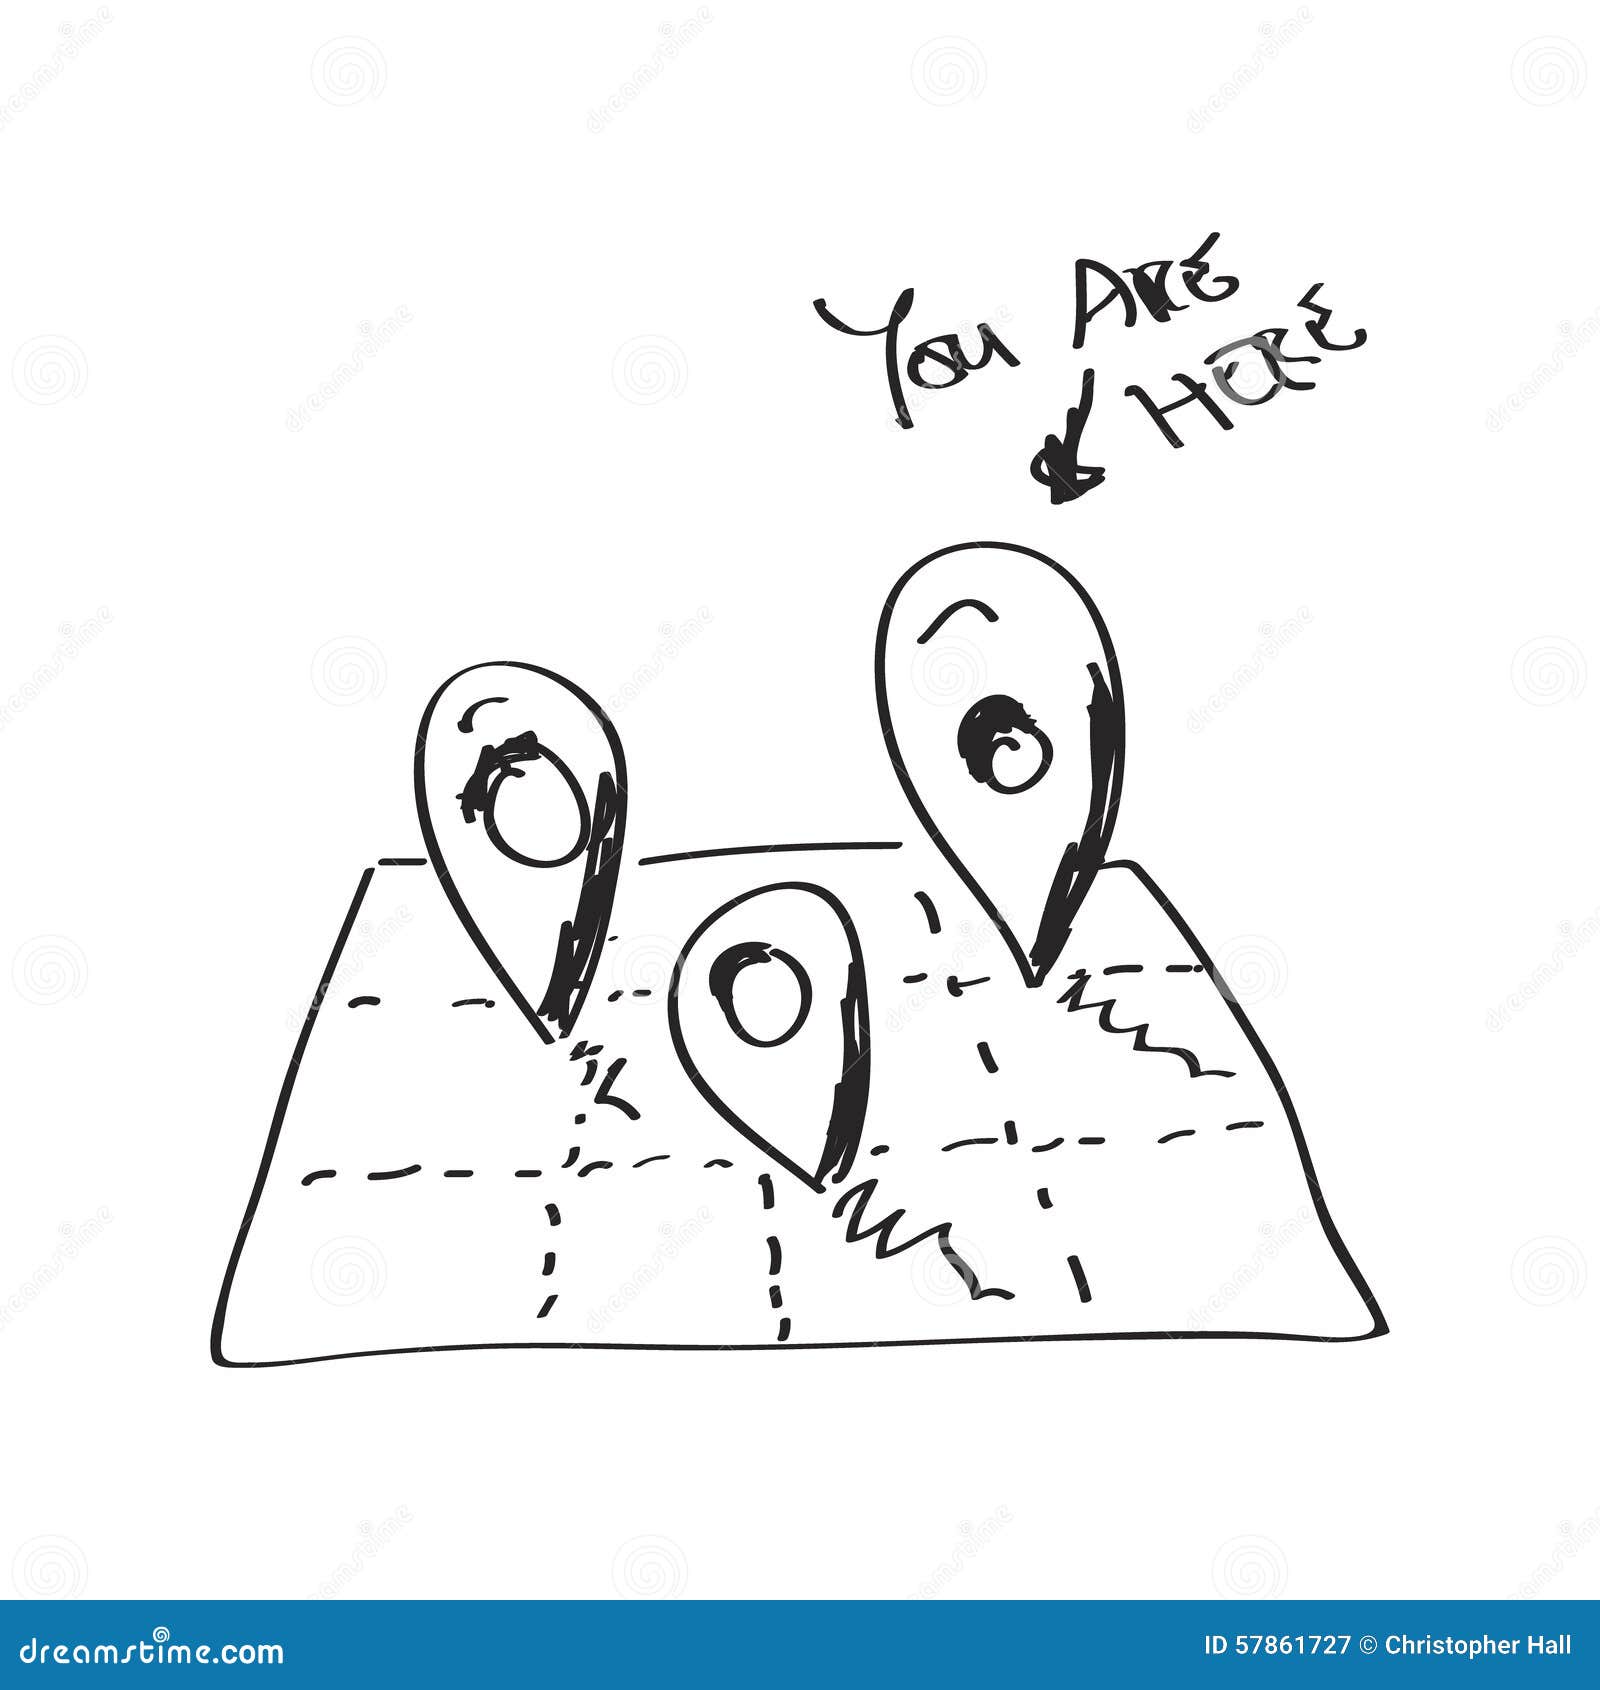 Sketch of Map Location V.2 - Apps on Google Play